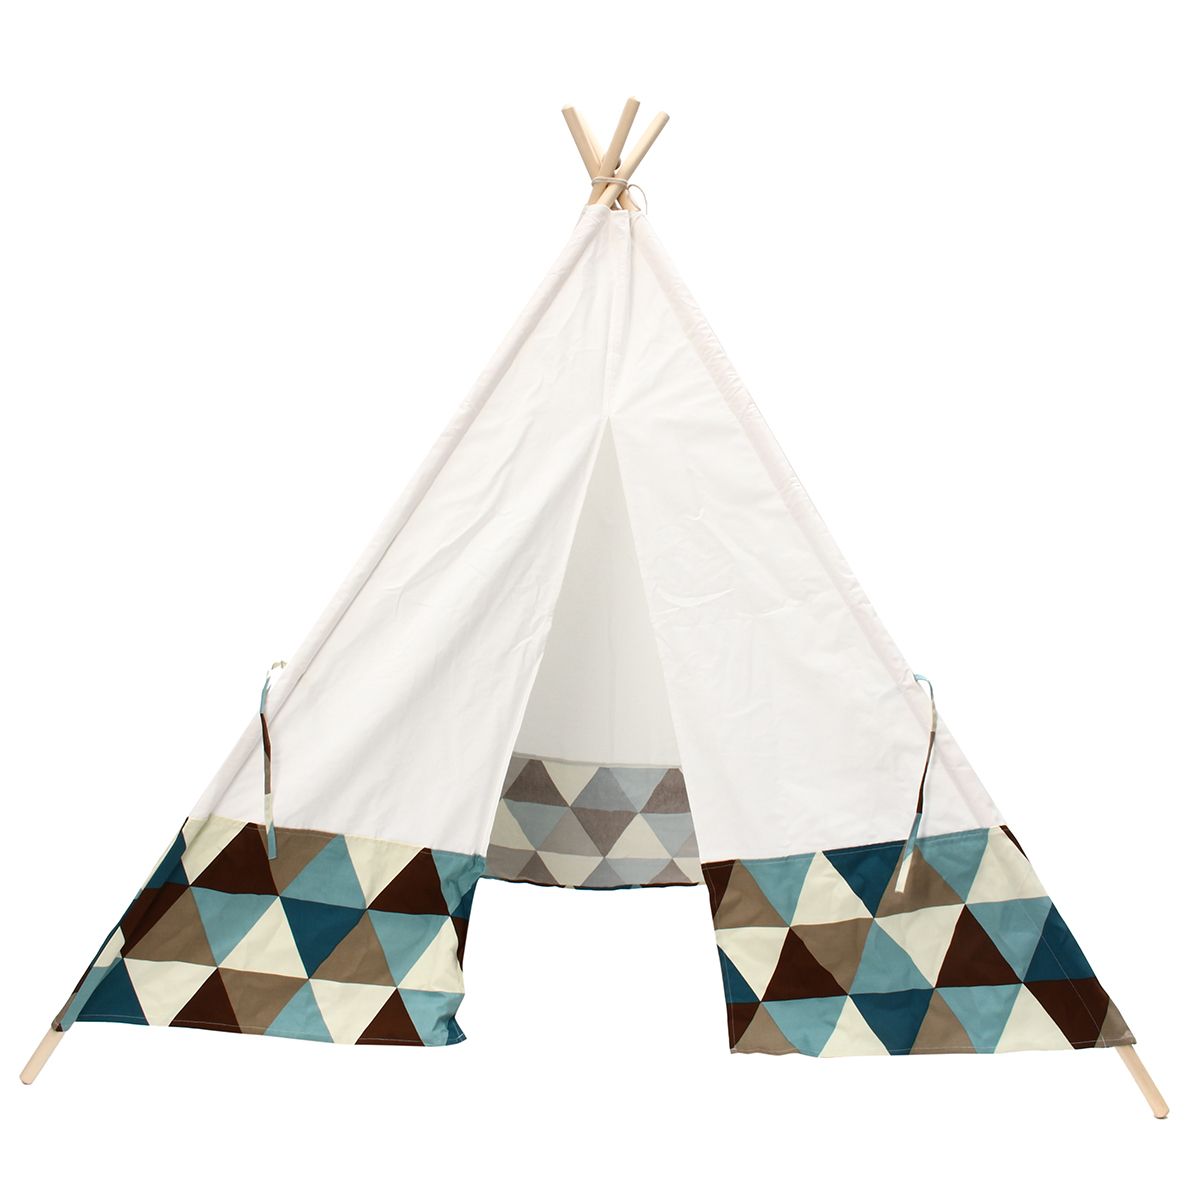 Portable-Kids-Play-Tent-Cotton-Canvas-Playhouse-Children-Sleeping-Playing-Teepee-Indoor-1396724